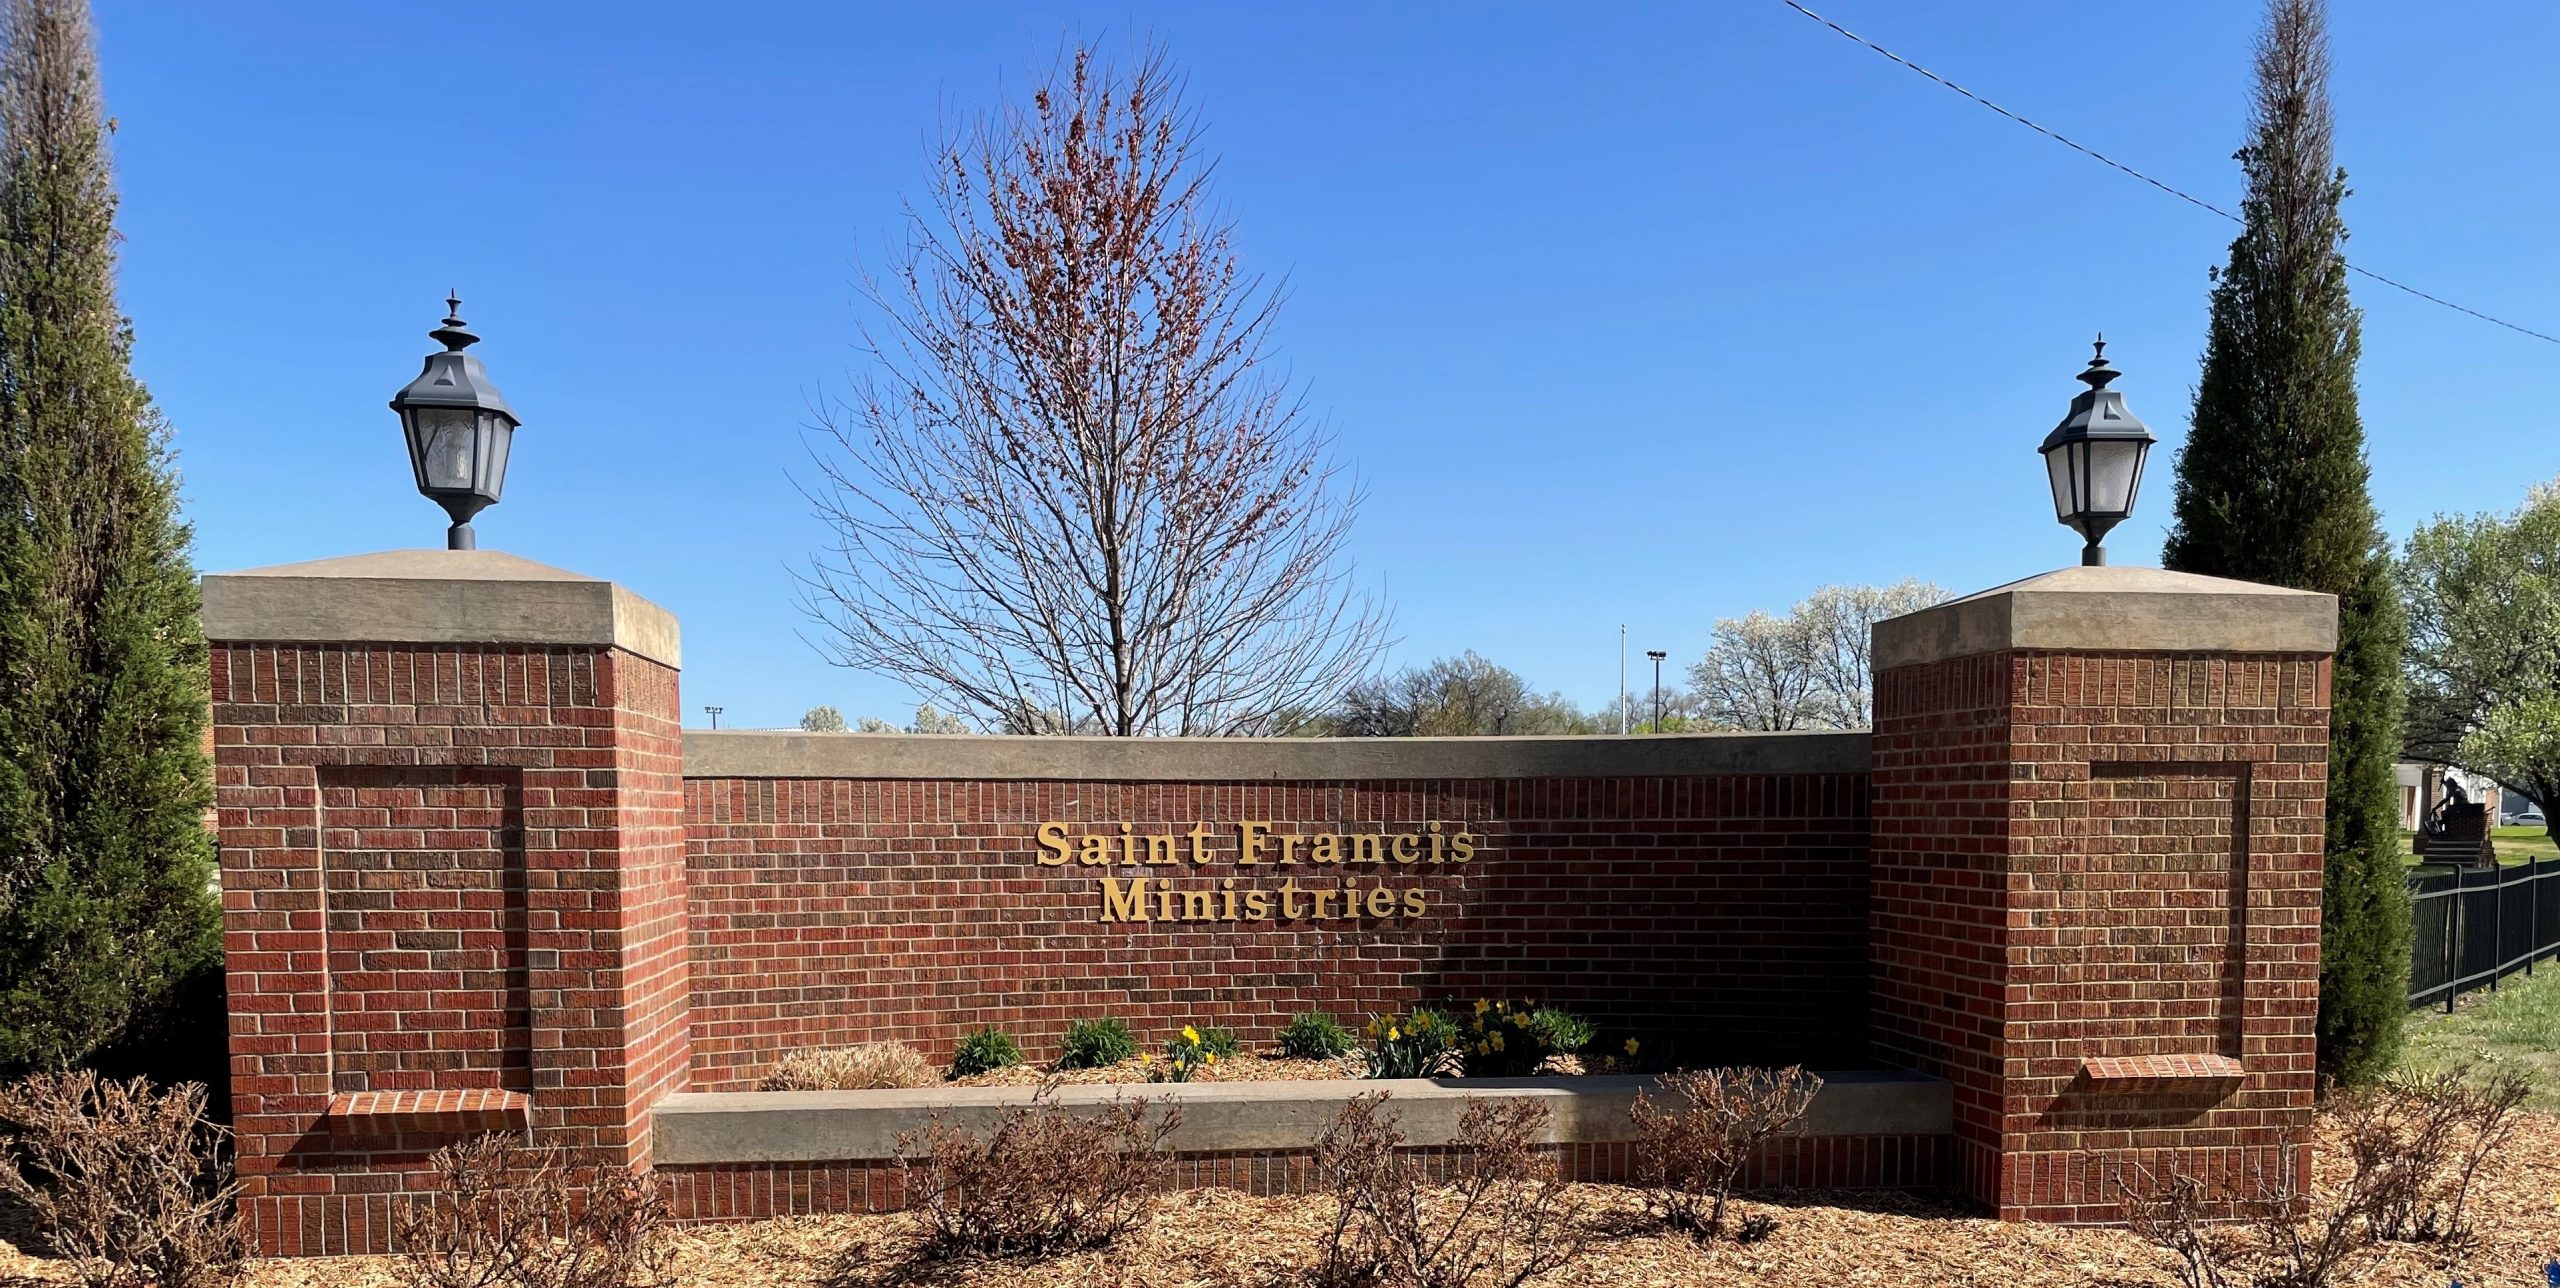 The image shows a red brick sign for Saint Francis Ministries. The sign is flanked by two brick columns topped with black lamp posts. A tree and some plants are in the background, and the sky is clear and blue. Shrubs are planted at the base of the sign.